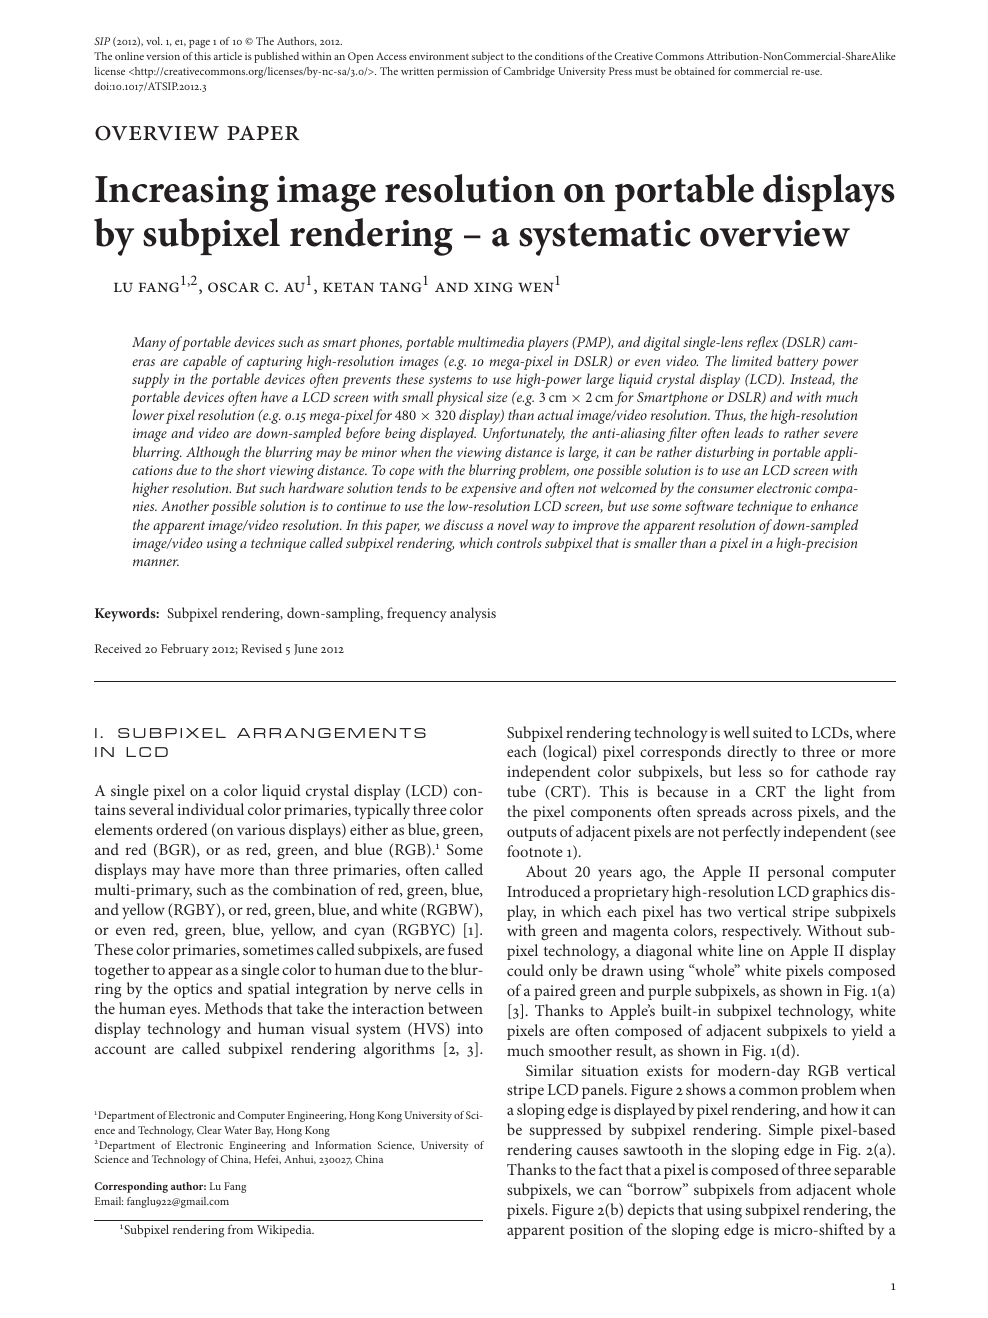 Increasing Image Resolution On Portable Displays By Subpixel Rendering A Systematic Overview Topic Of Research Paper In Electrical Engineering Electronic Engineering Information Engineering Download Scholarly Article Pdf And Read For